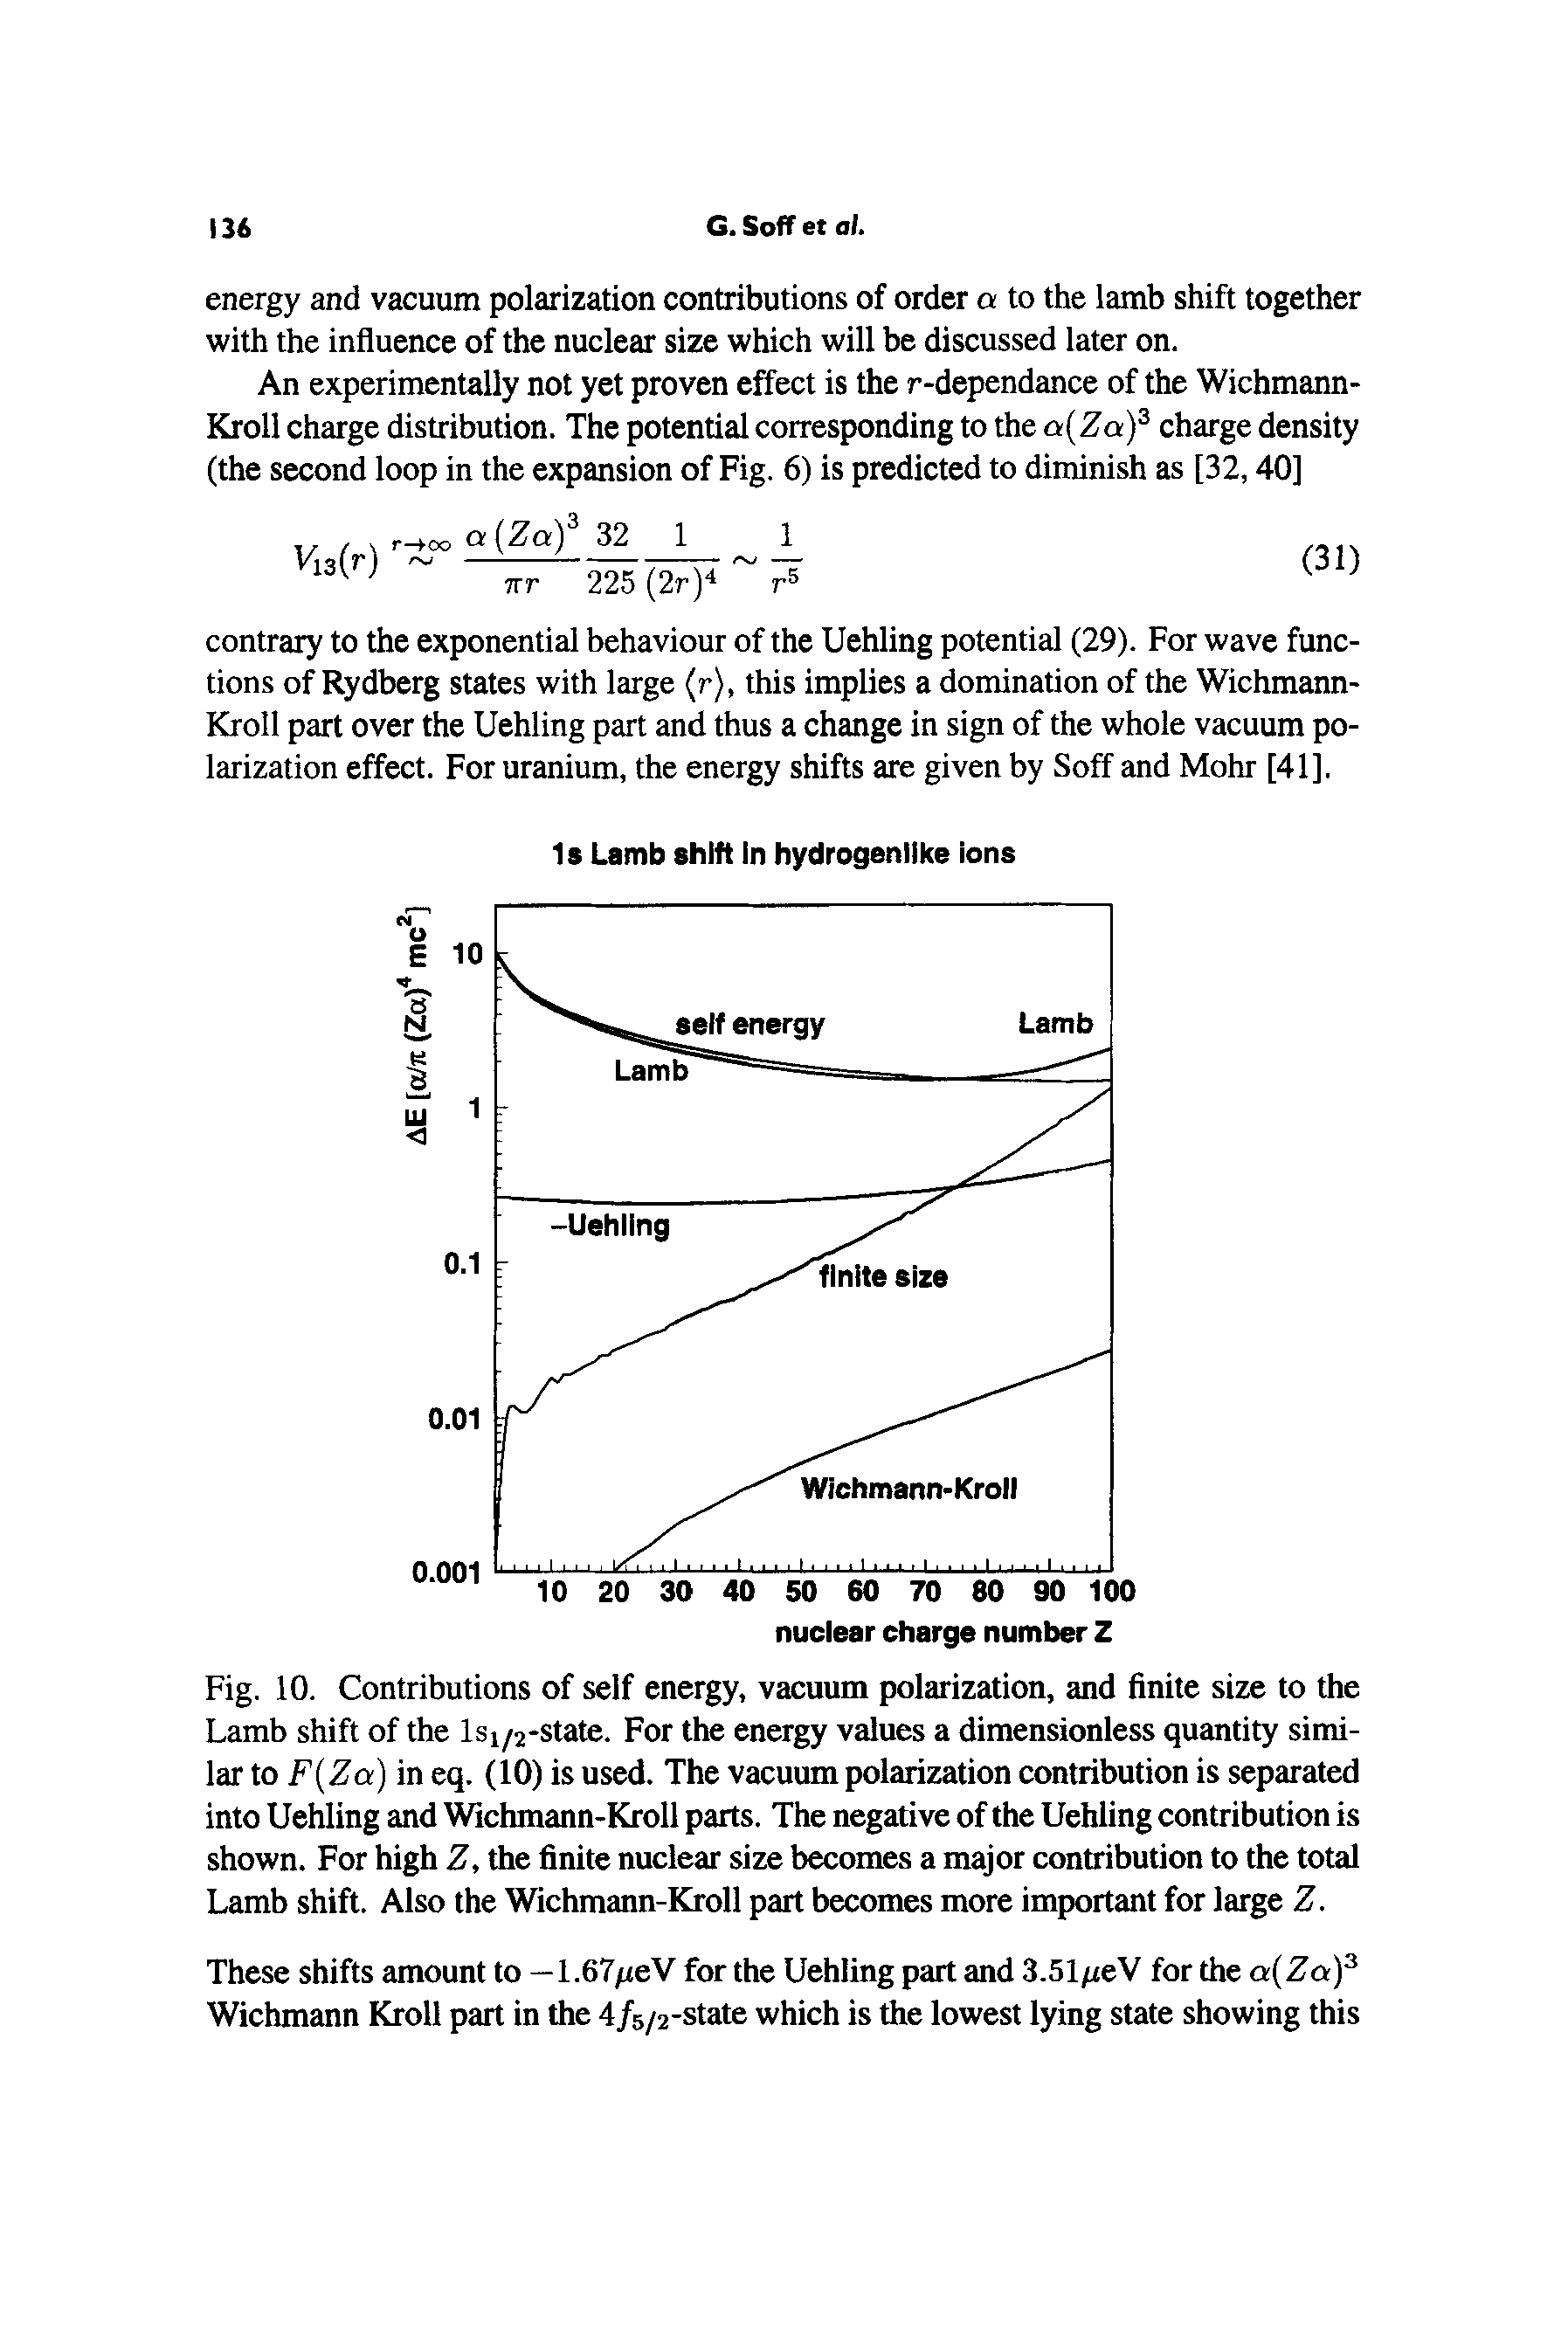 Fig. 10. Contributions of self energy, vacuum polarization, and finite size to the Lamb shift of the lsi/2-state. For the energy values a dimensionless quantity similar to F Za) in eq. (10) is used. The vacuum polarization contribution is separated into Uehling and Wichmann-Kroll parts. The negative of the Uehling contribution is shown. For high Z, the finite nuclear size becomes a major contribution to the total Lamb shift. Also the Wichmann-Kroll part becomes more important for large Z.